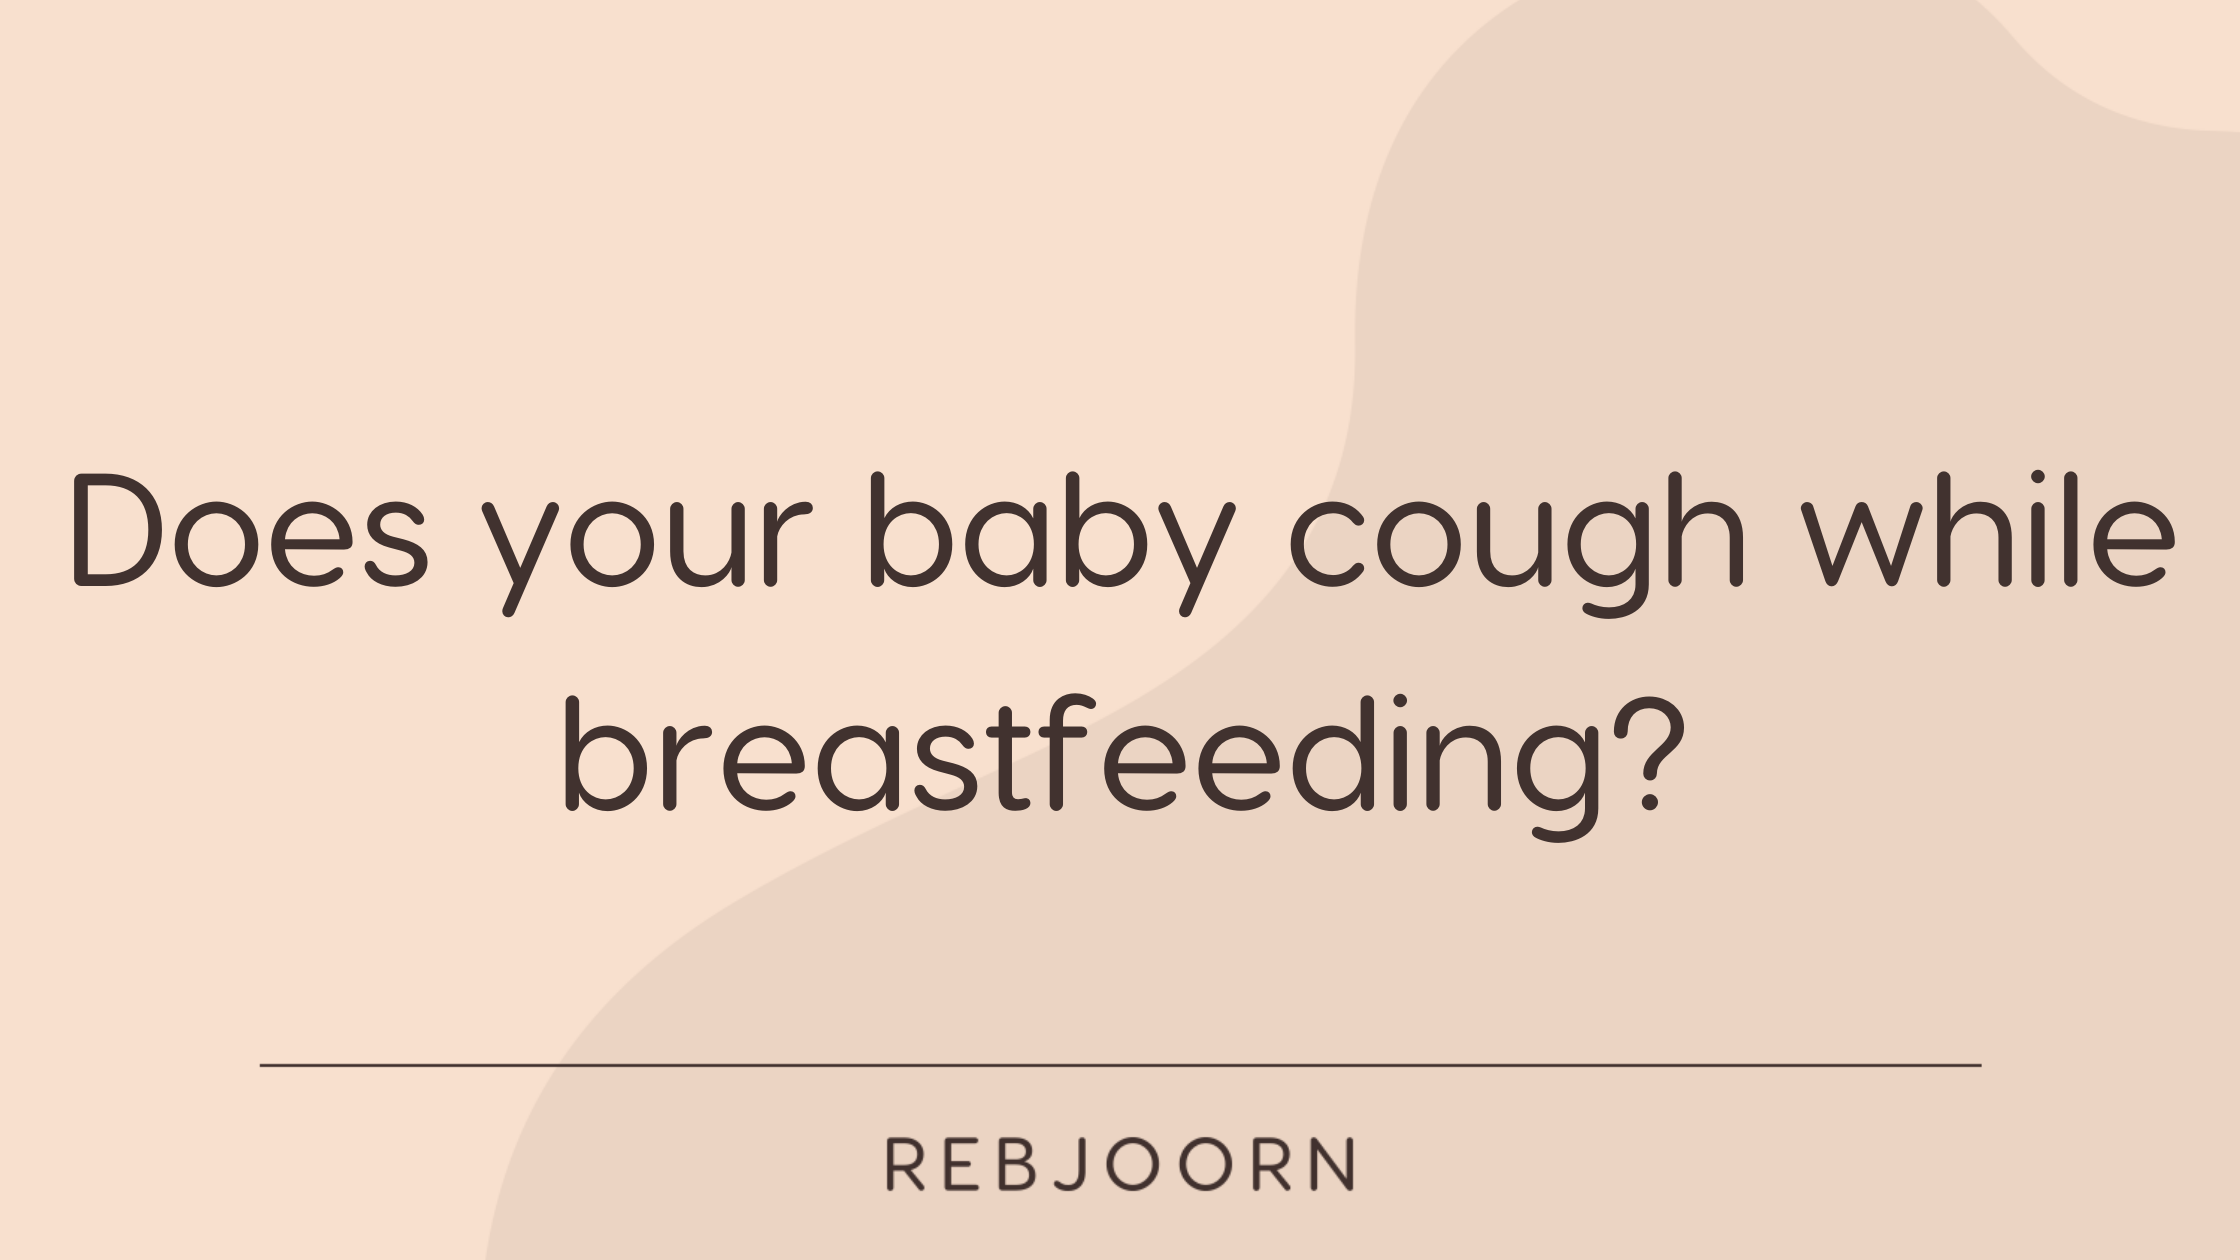 Does your baby cough while breastfeeding?